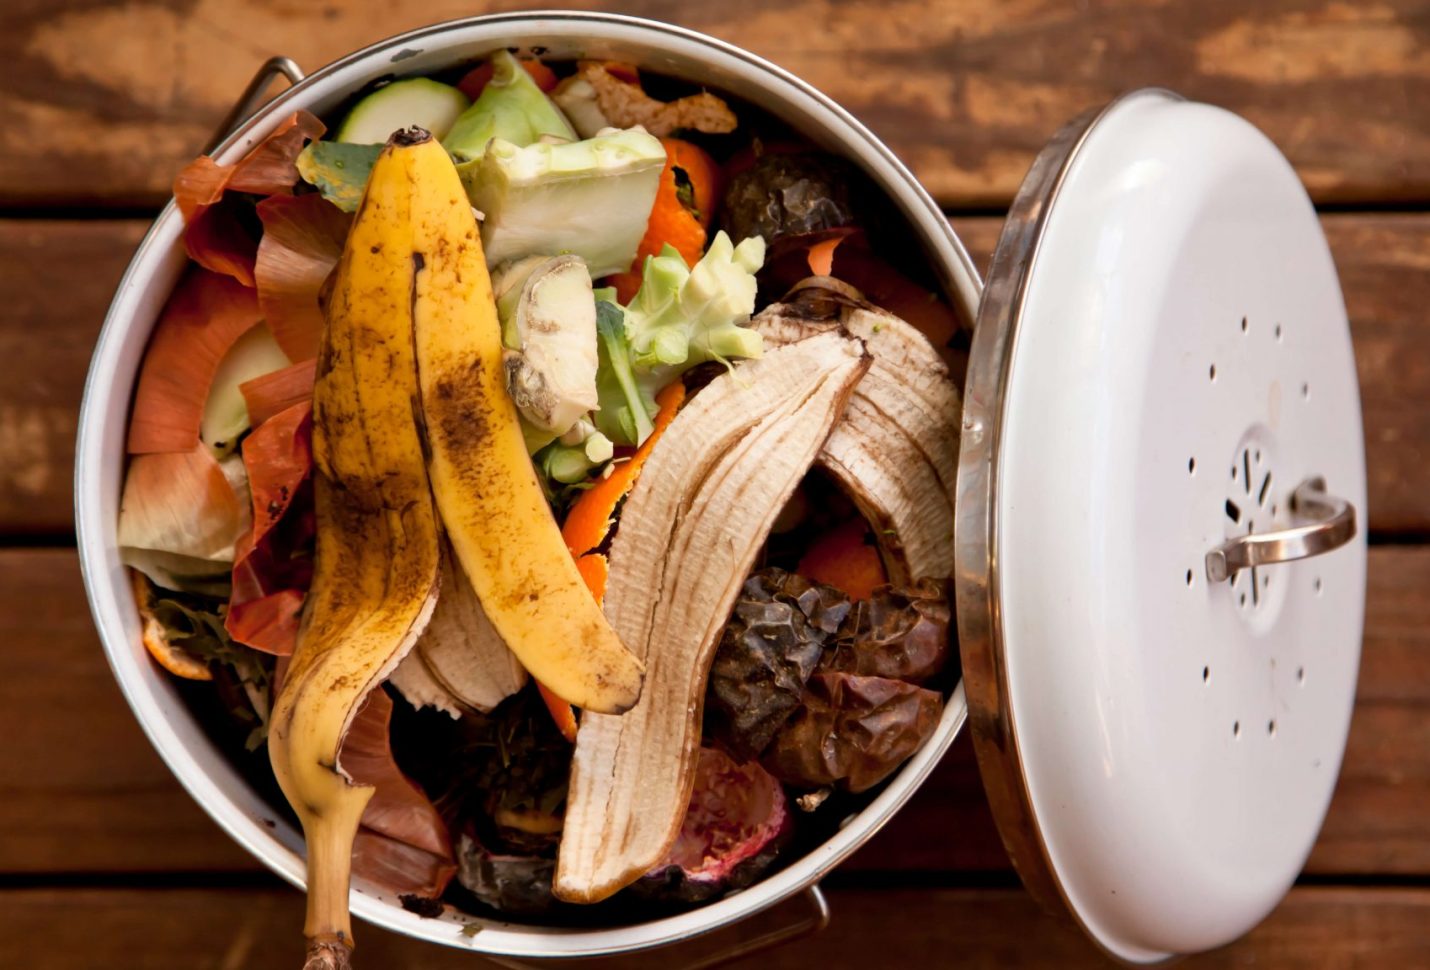 Food waste generates 8-10% of global emissions, causes $ 1 trln economic losses